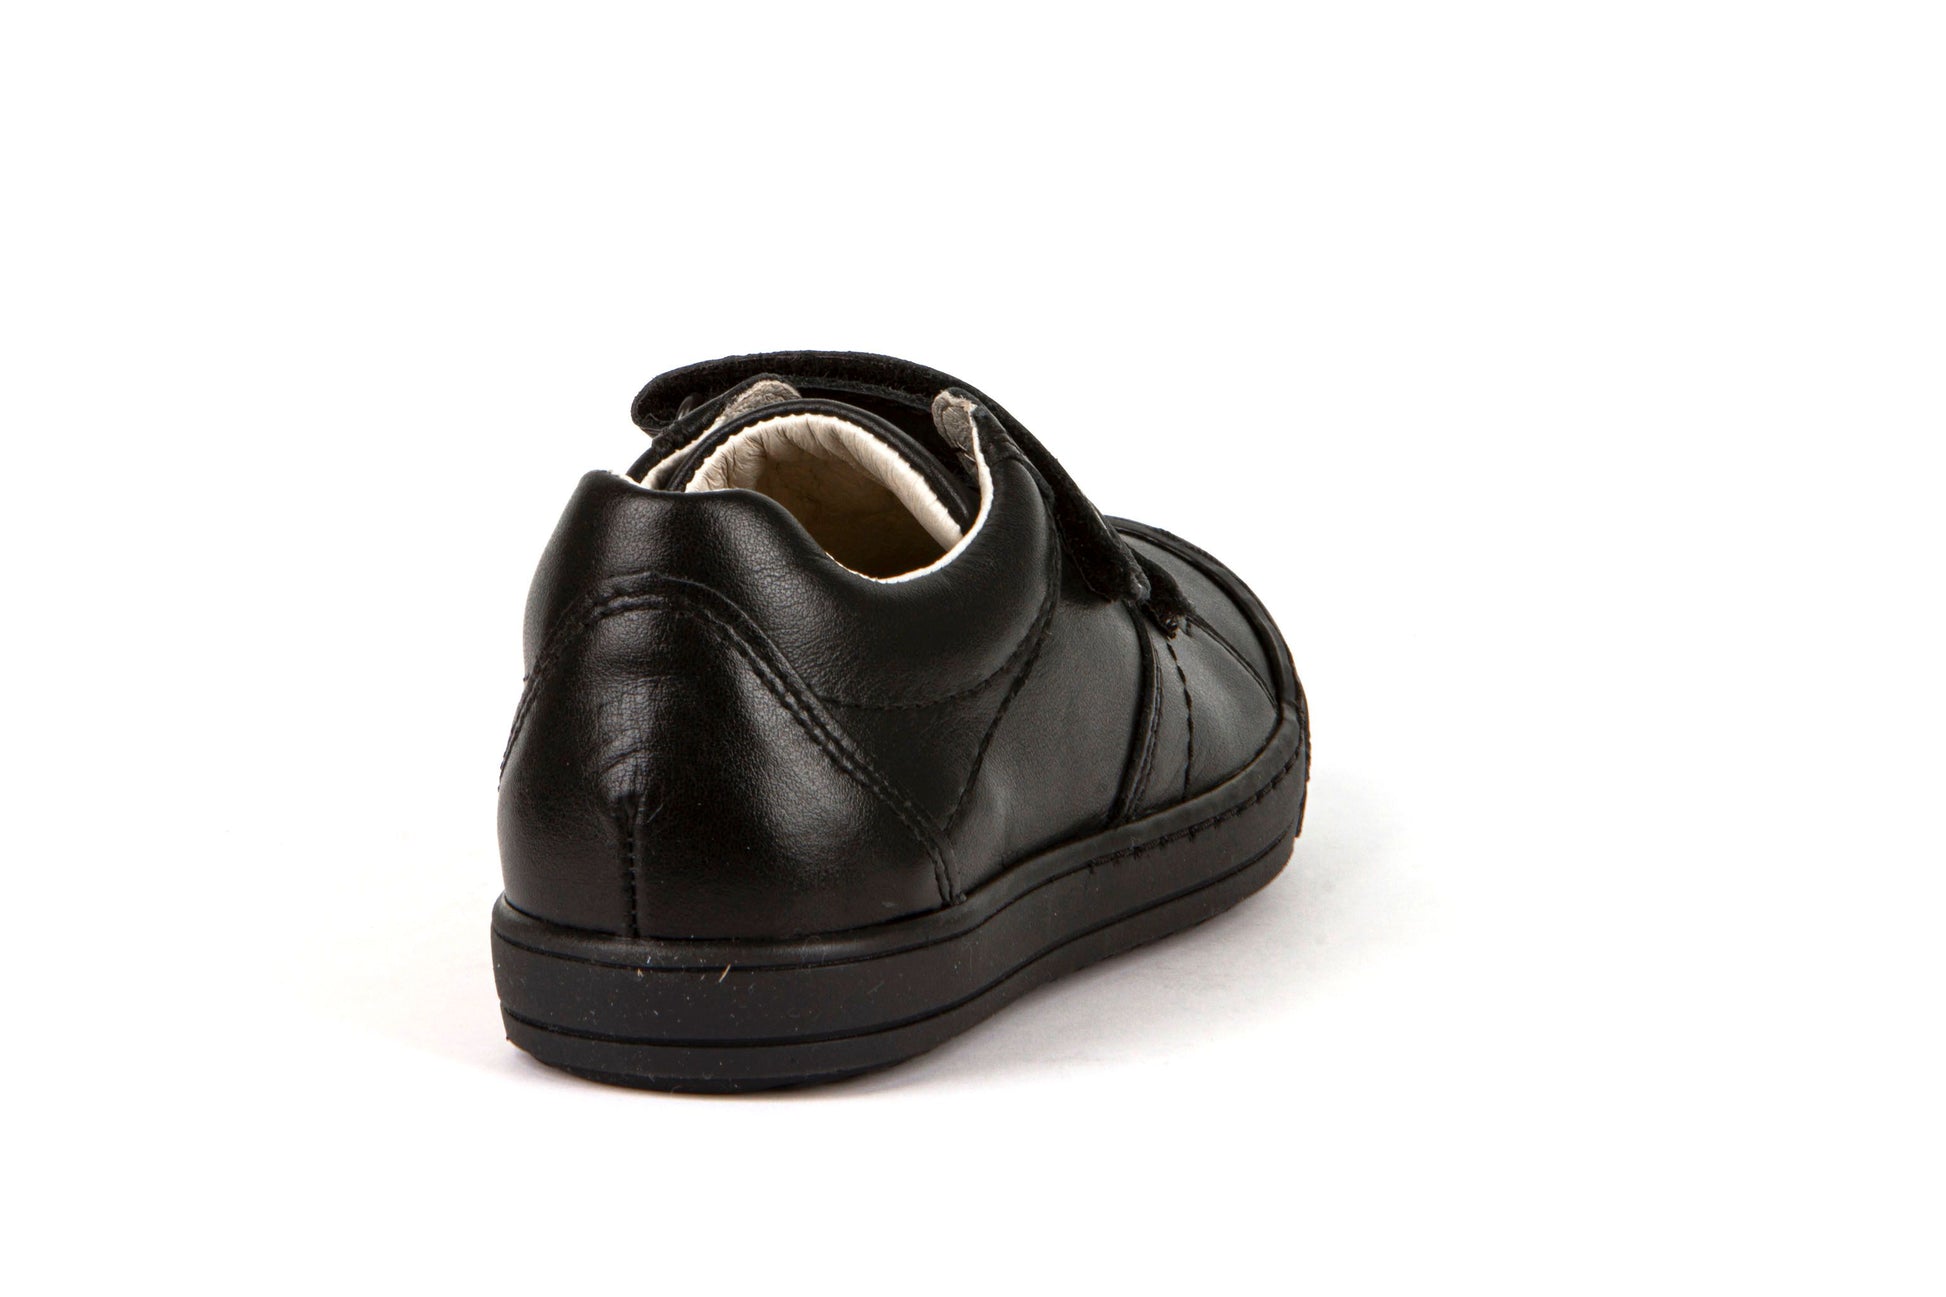 A boys school shoe by Froddo, style Luka, in black with double velcro fastening. Back view.